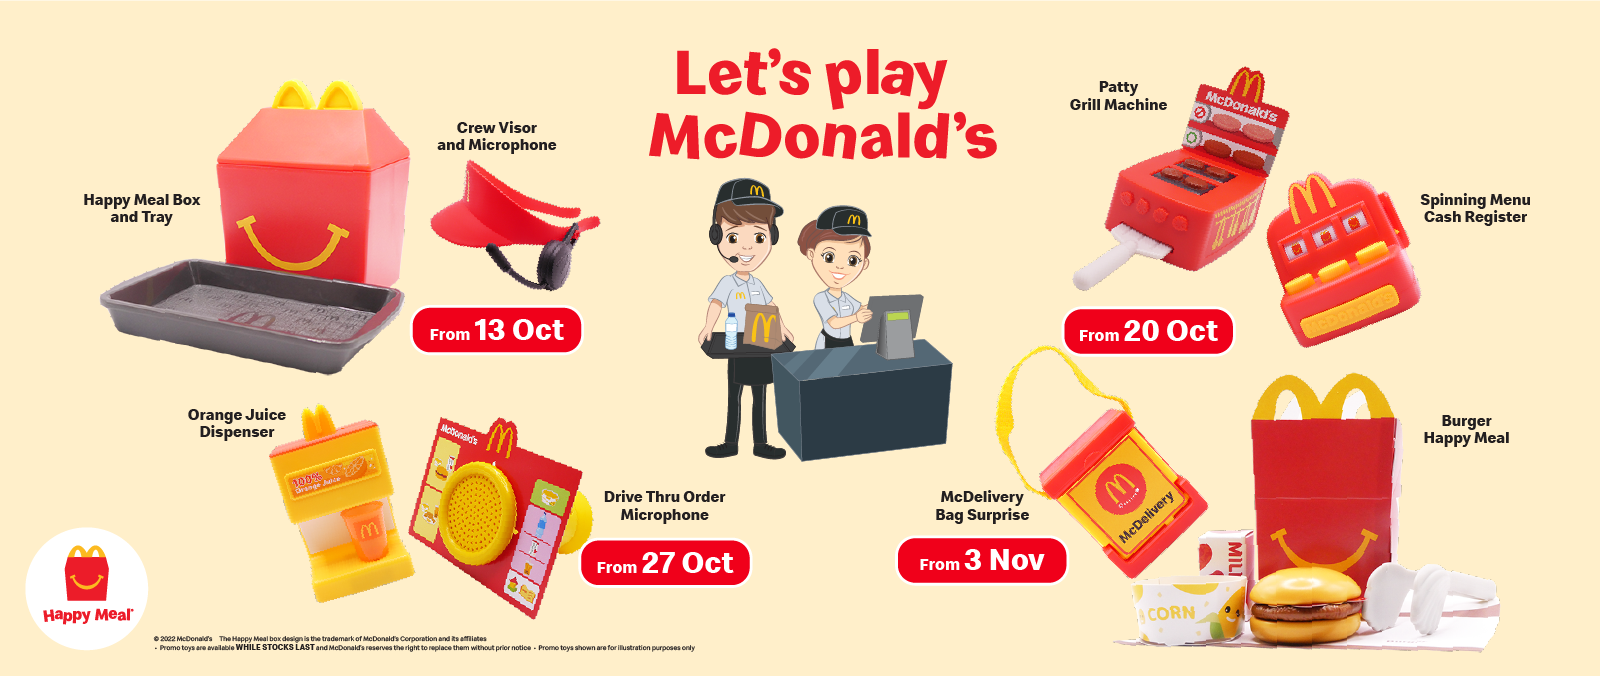 McDonald's Malaysia Let's Play McDonald's with AllNew Collectibles!